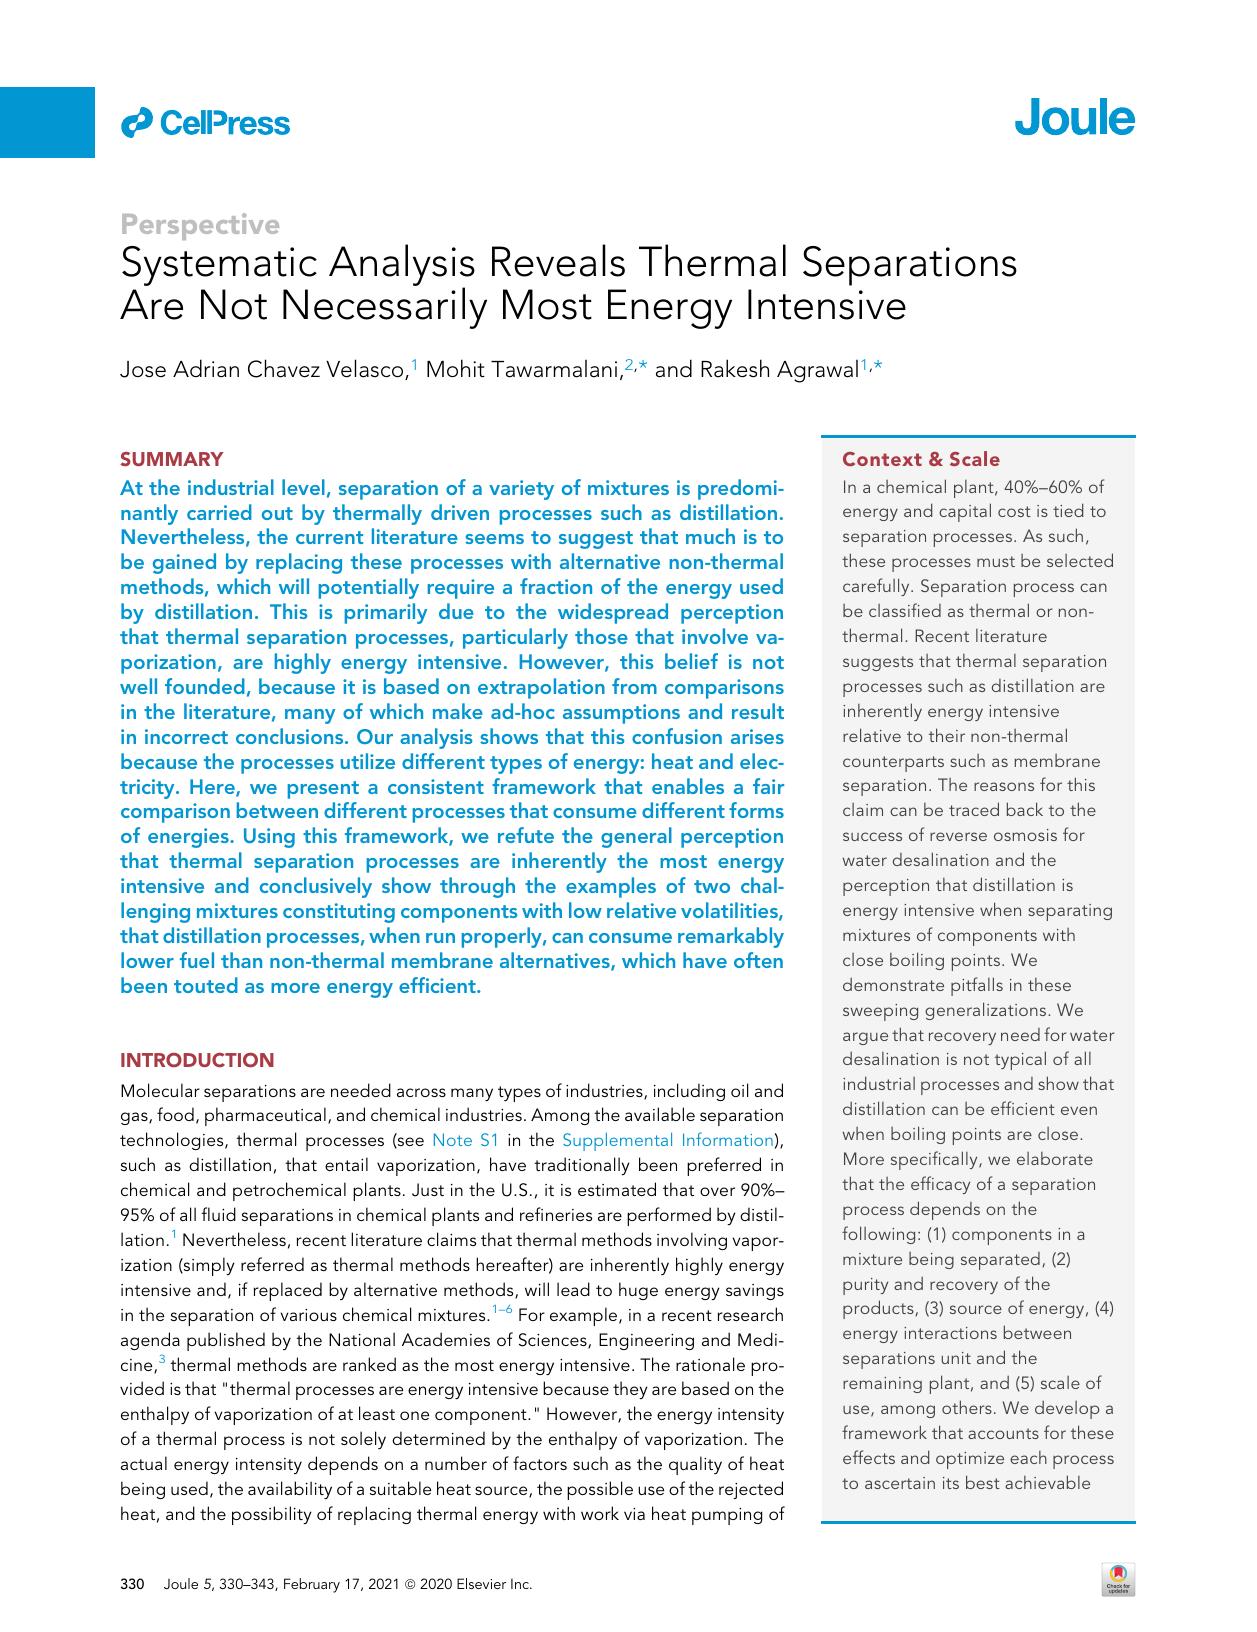 Systematic Analysis Reveals Thermal Separations Are Not Necessarily Most Energy Intensive by Jose Adrian Chavez Velasco & Mohit Tawarmalani & Rakesh Agrawal